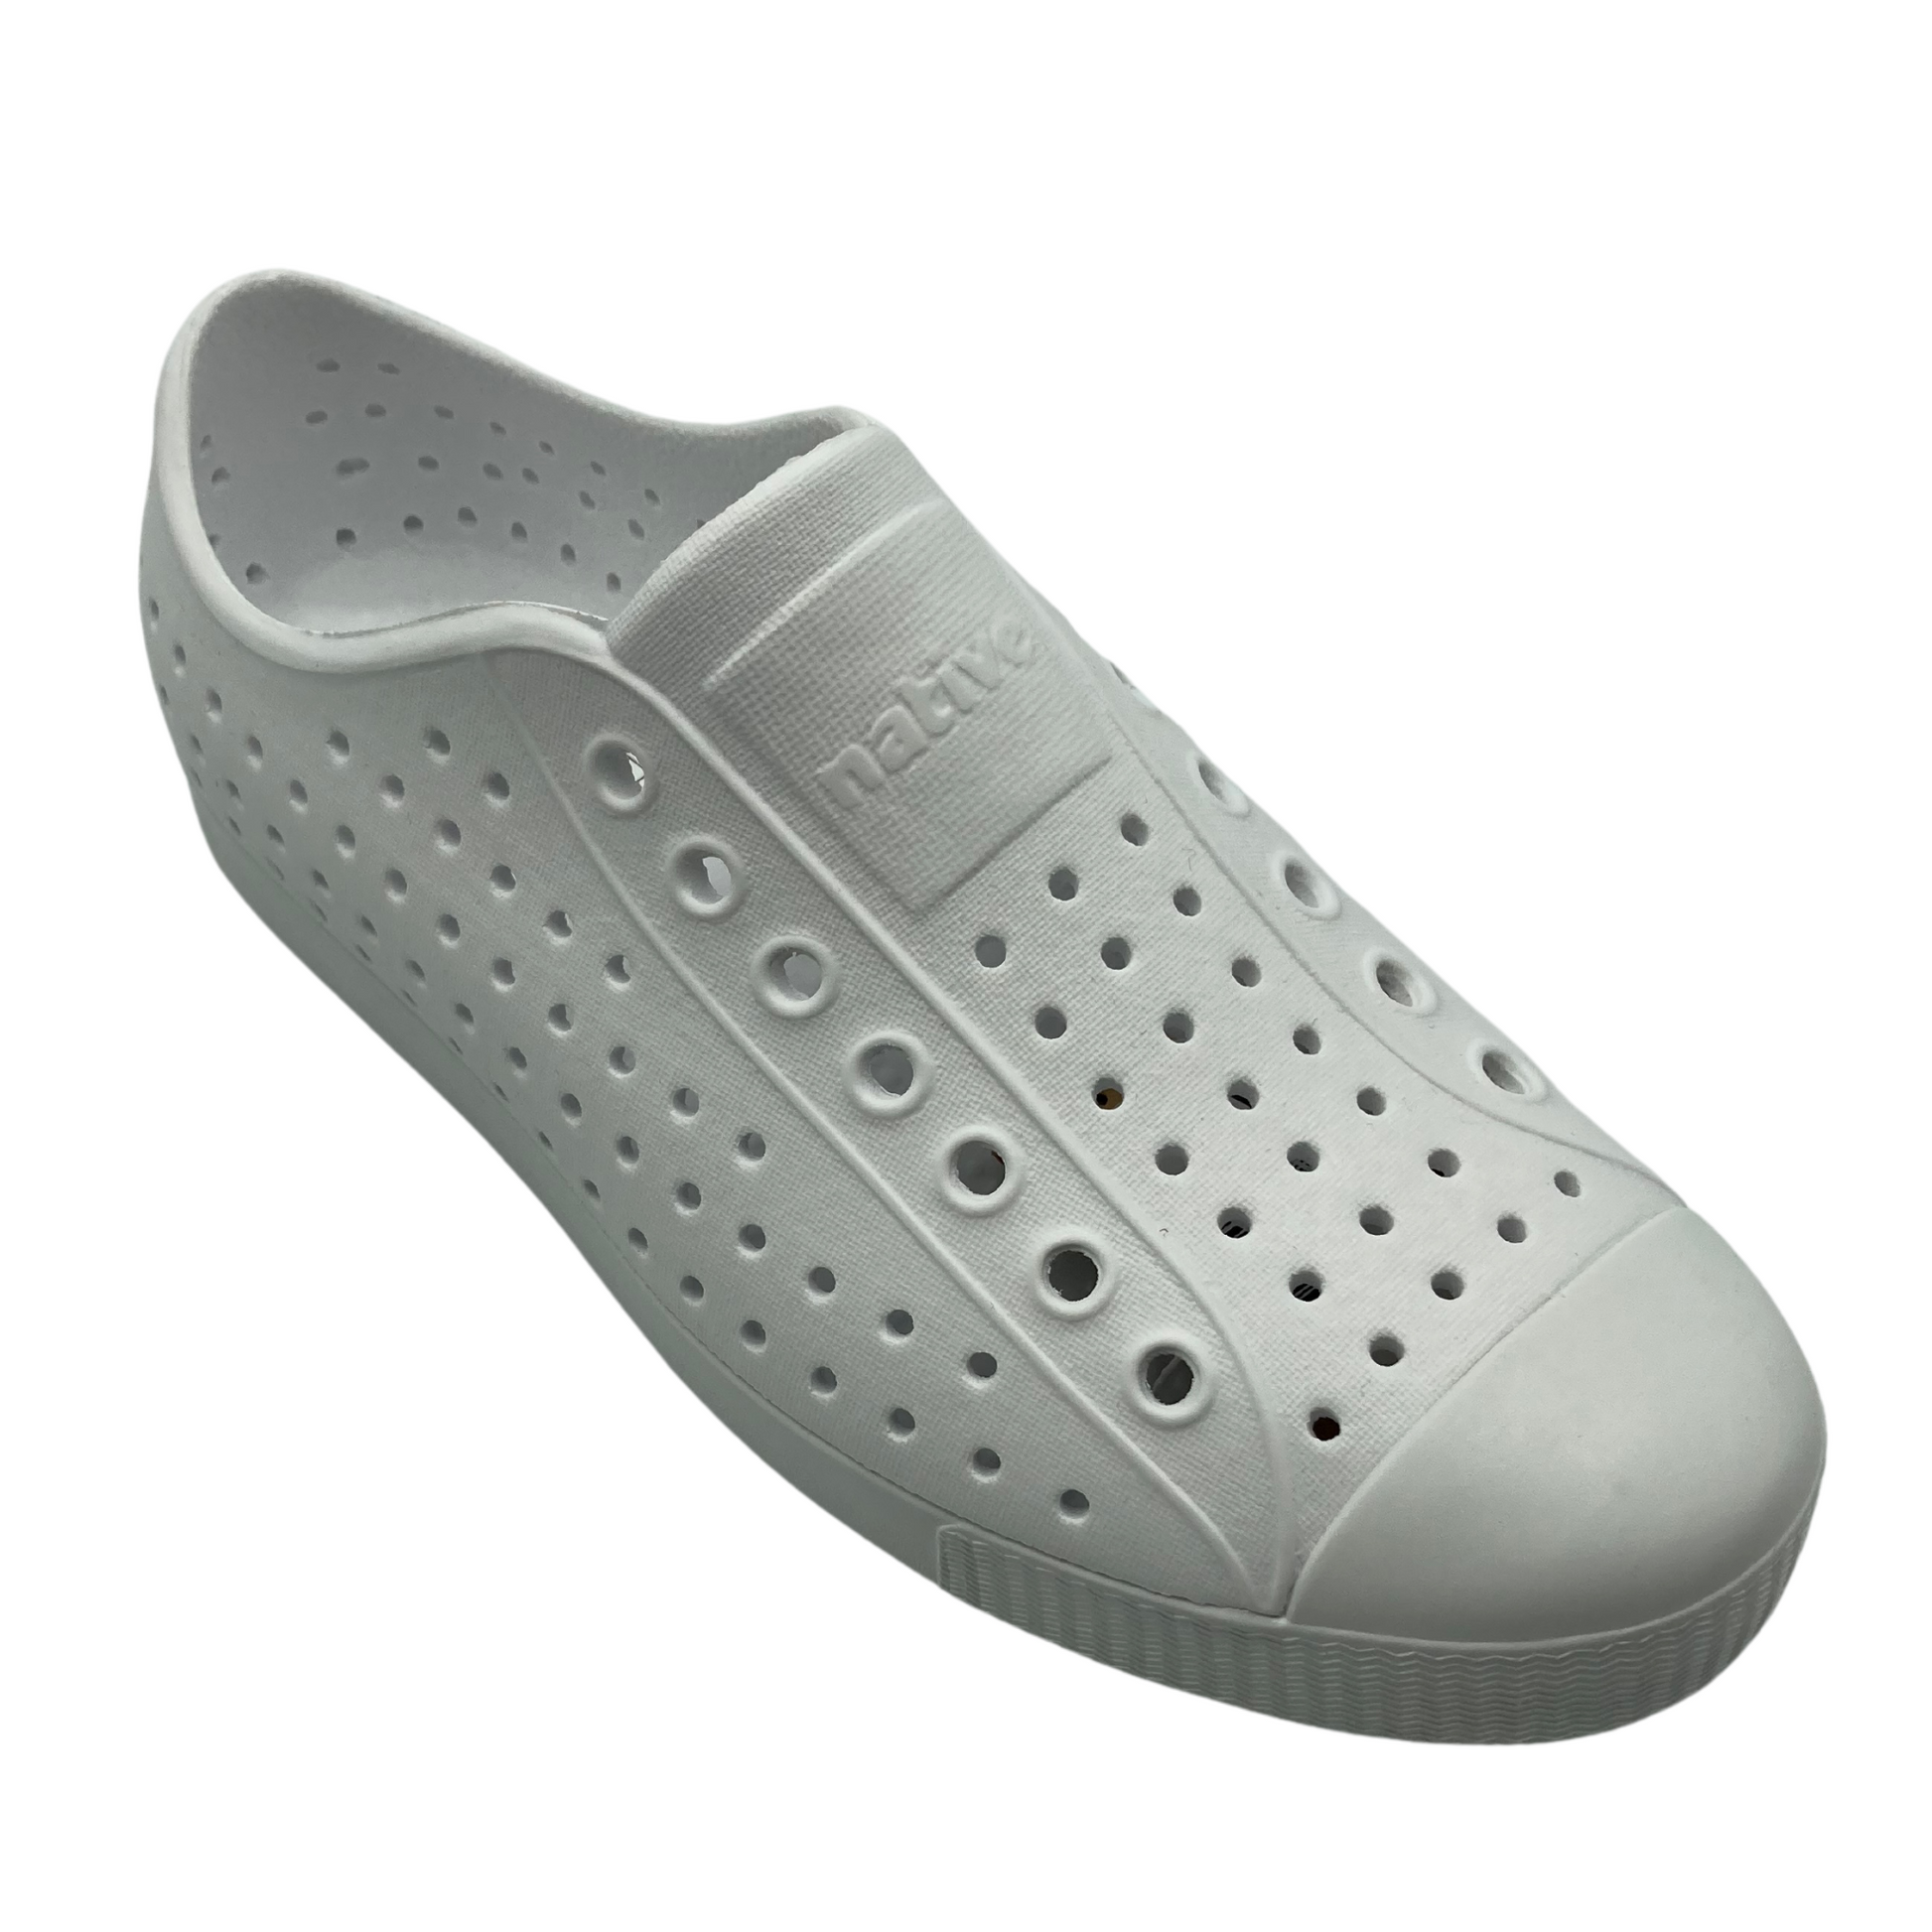 A plain white sneaker with larger perforations running parallel down the front, a plain toe box, and a square on the top front tongue reading "native" that is seemingly contoured into the form of the shoe.